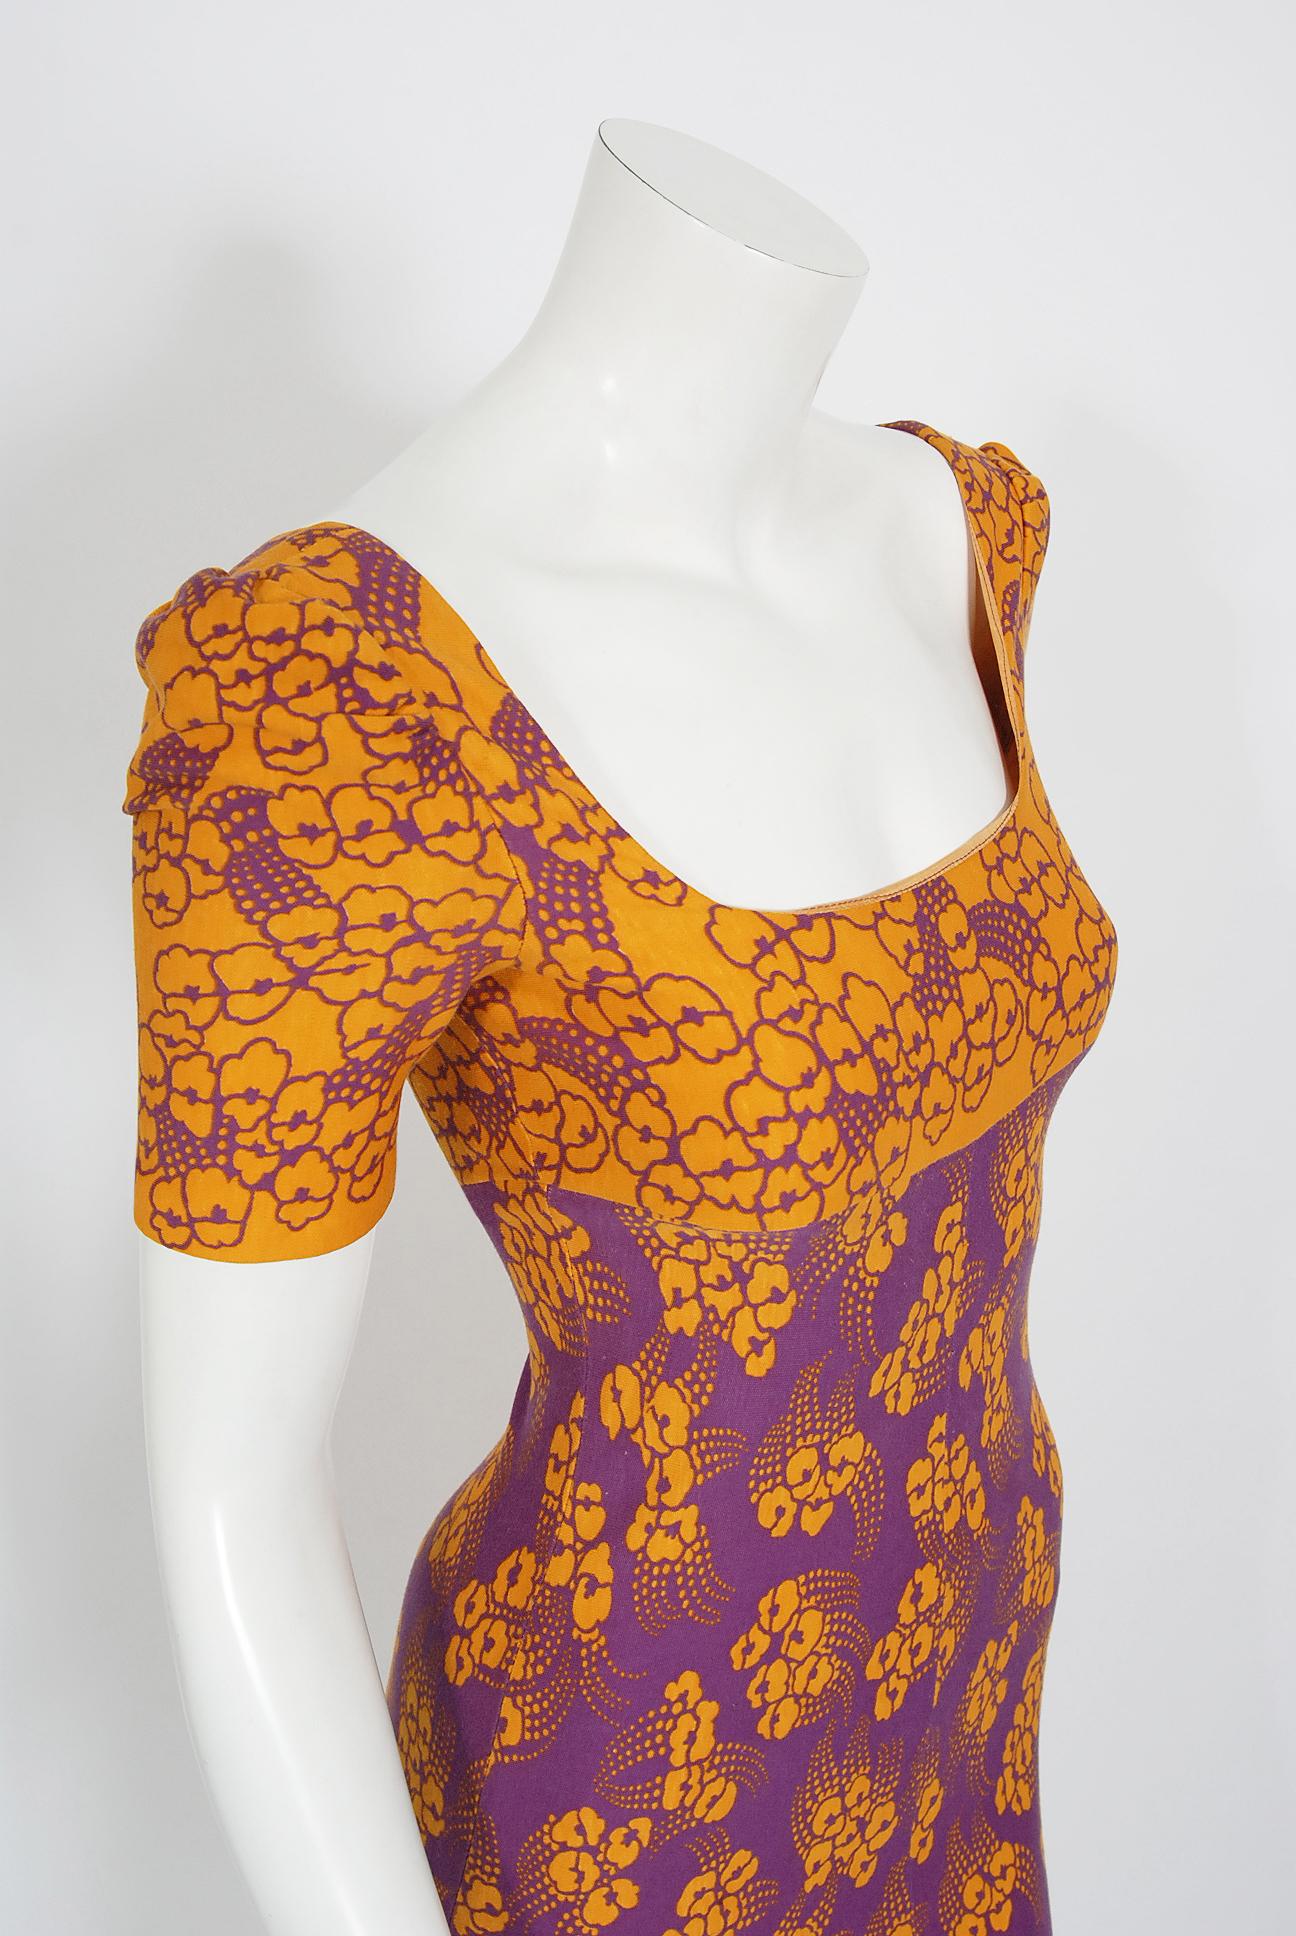 If you were an “It Girl” in London during the 1960's and 1970's, Biba is where you would have shopped. This sensational purple and yellow deco floral dress, dating back to 1969, is a perfect example of the brand's genius. The jersey fabric has a